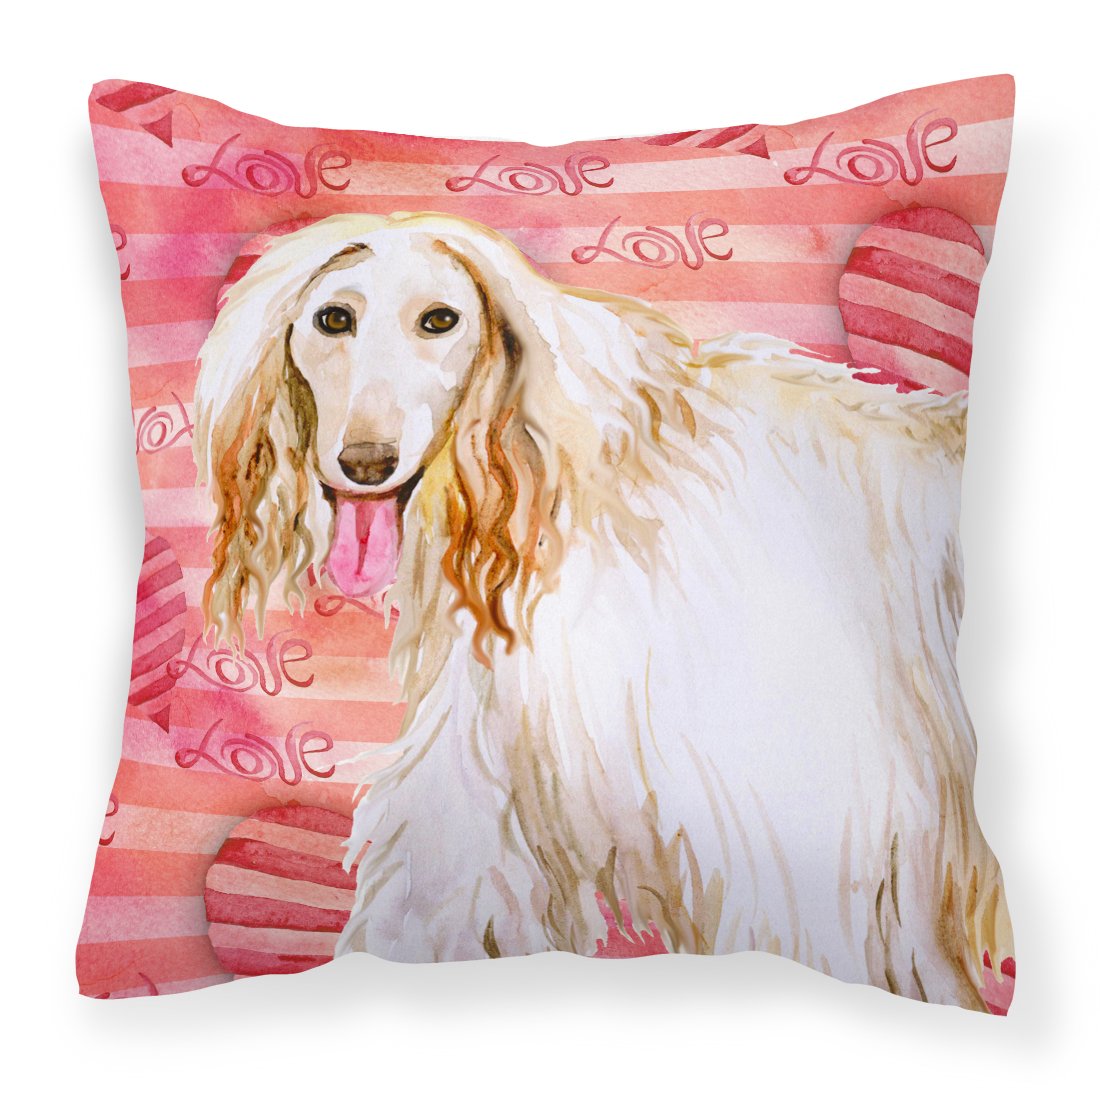 Afghan Hound Love Fabric Decorative Pillow BB9789PW1818 by Caroline's Treasures